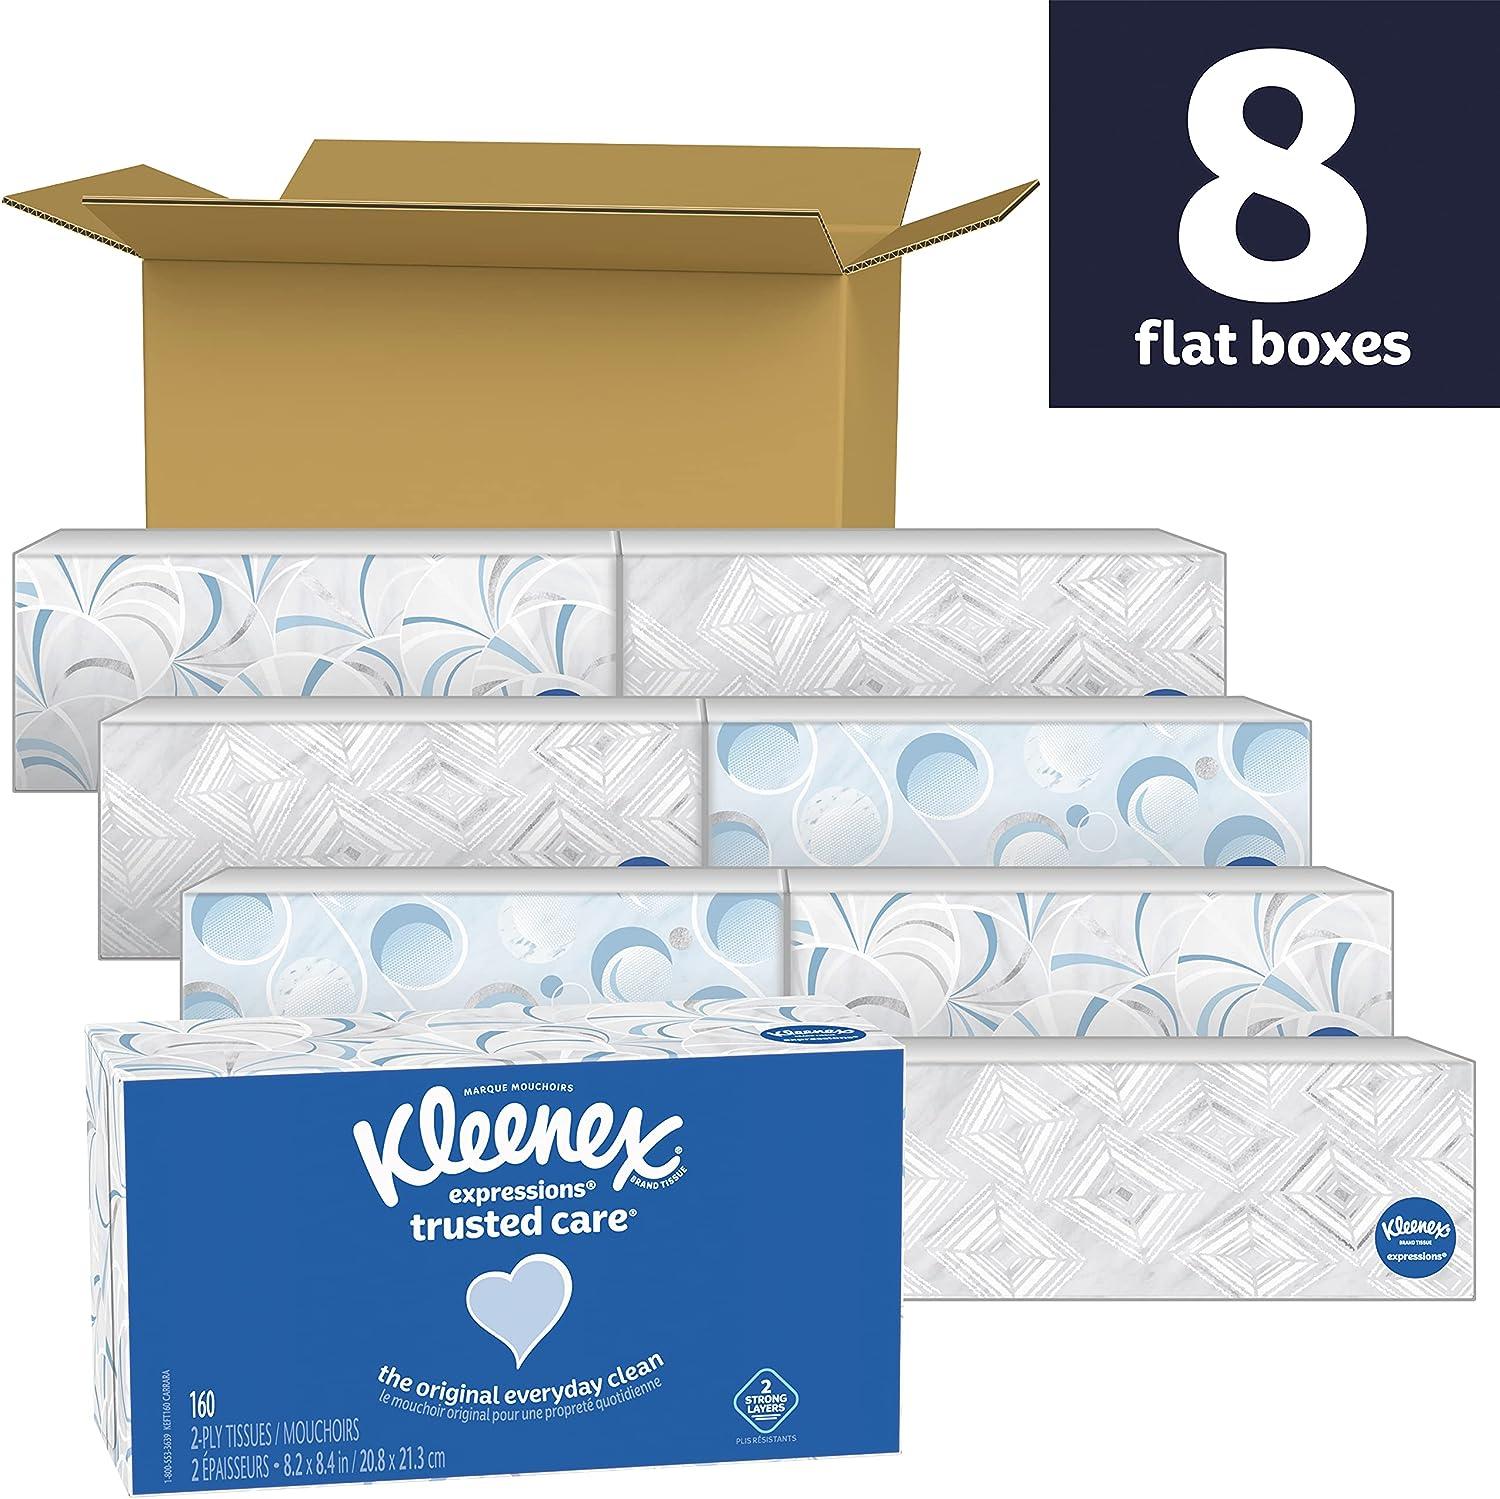 Kleenex Expressions Trusted Care Facial Tissues, 8 Boxes, 160 Tissues per  Box, 2-Ply (1,280 Total Tissues)